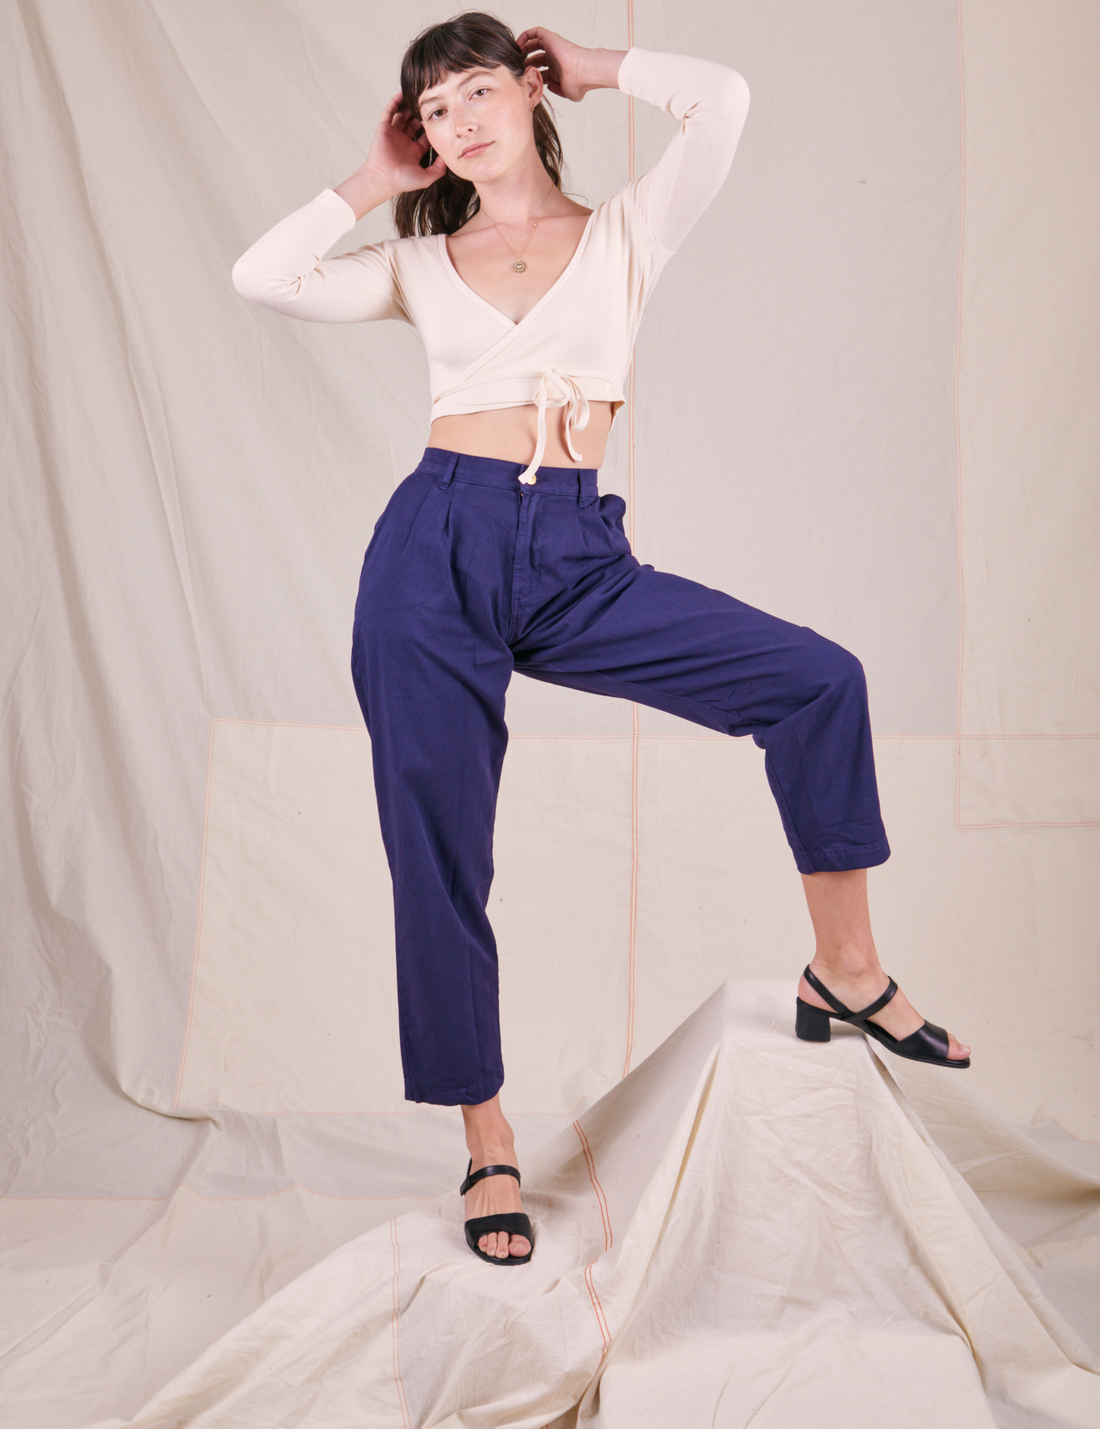 Wrap Top in Vintage Tee Off-White on Alex wearing navy blue trousers